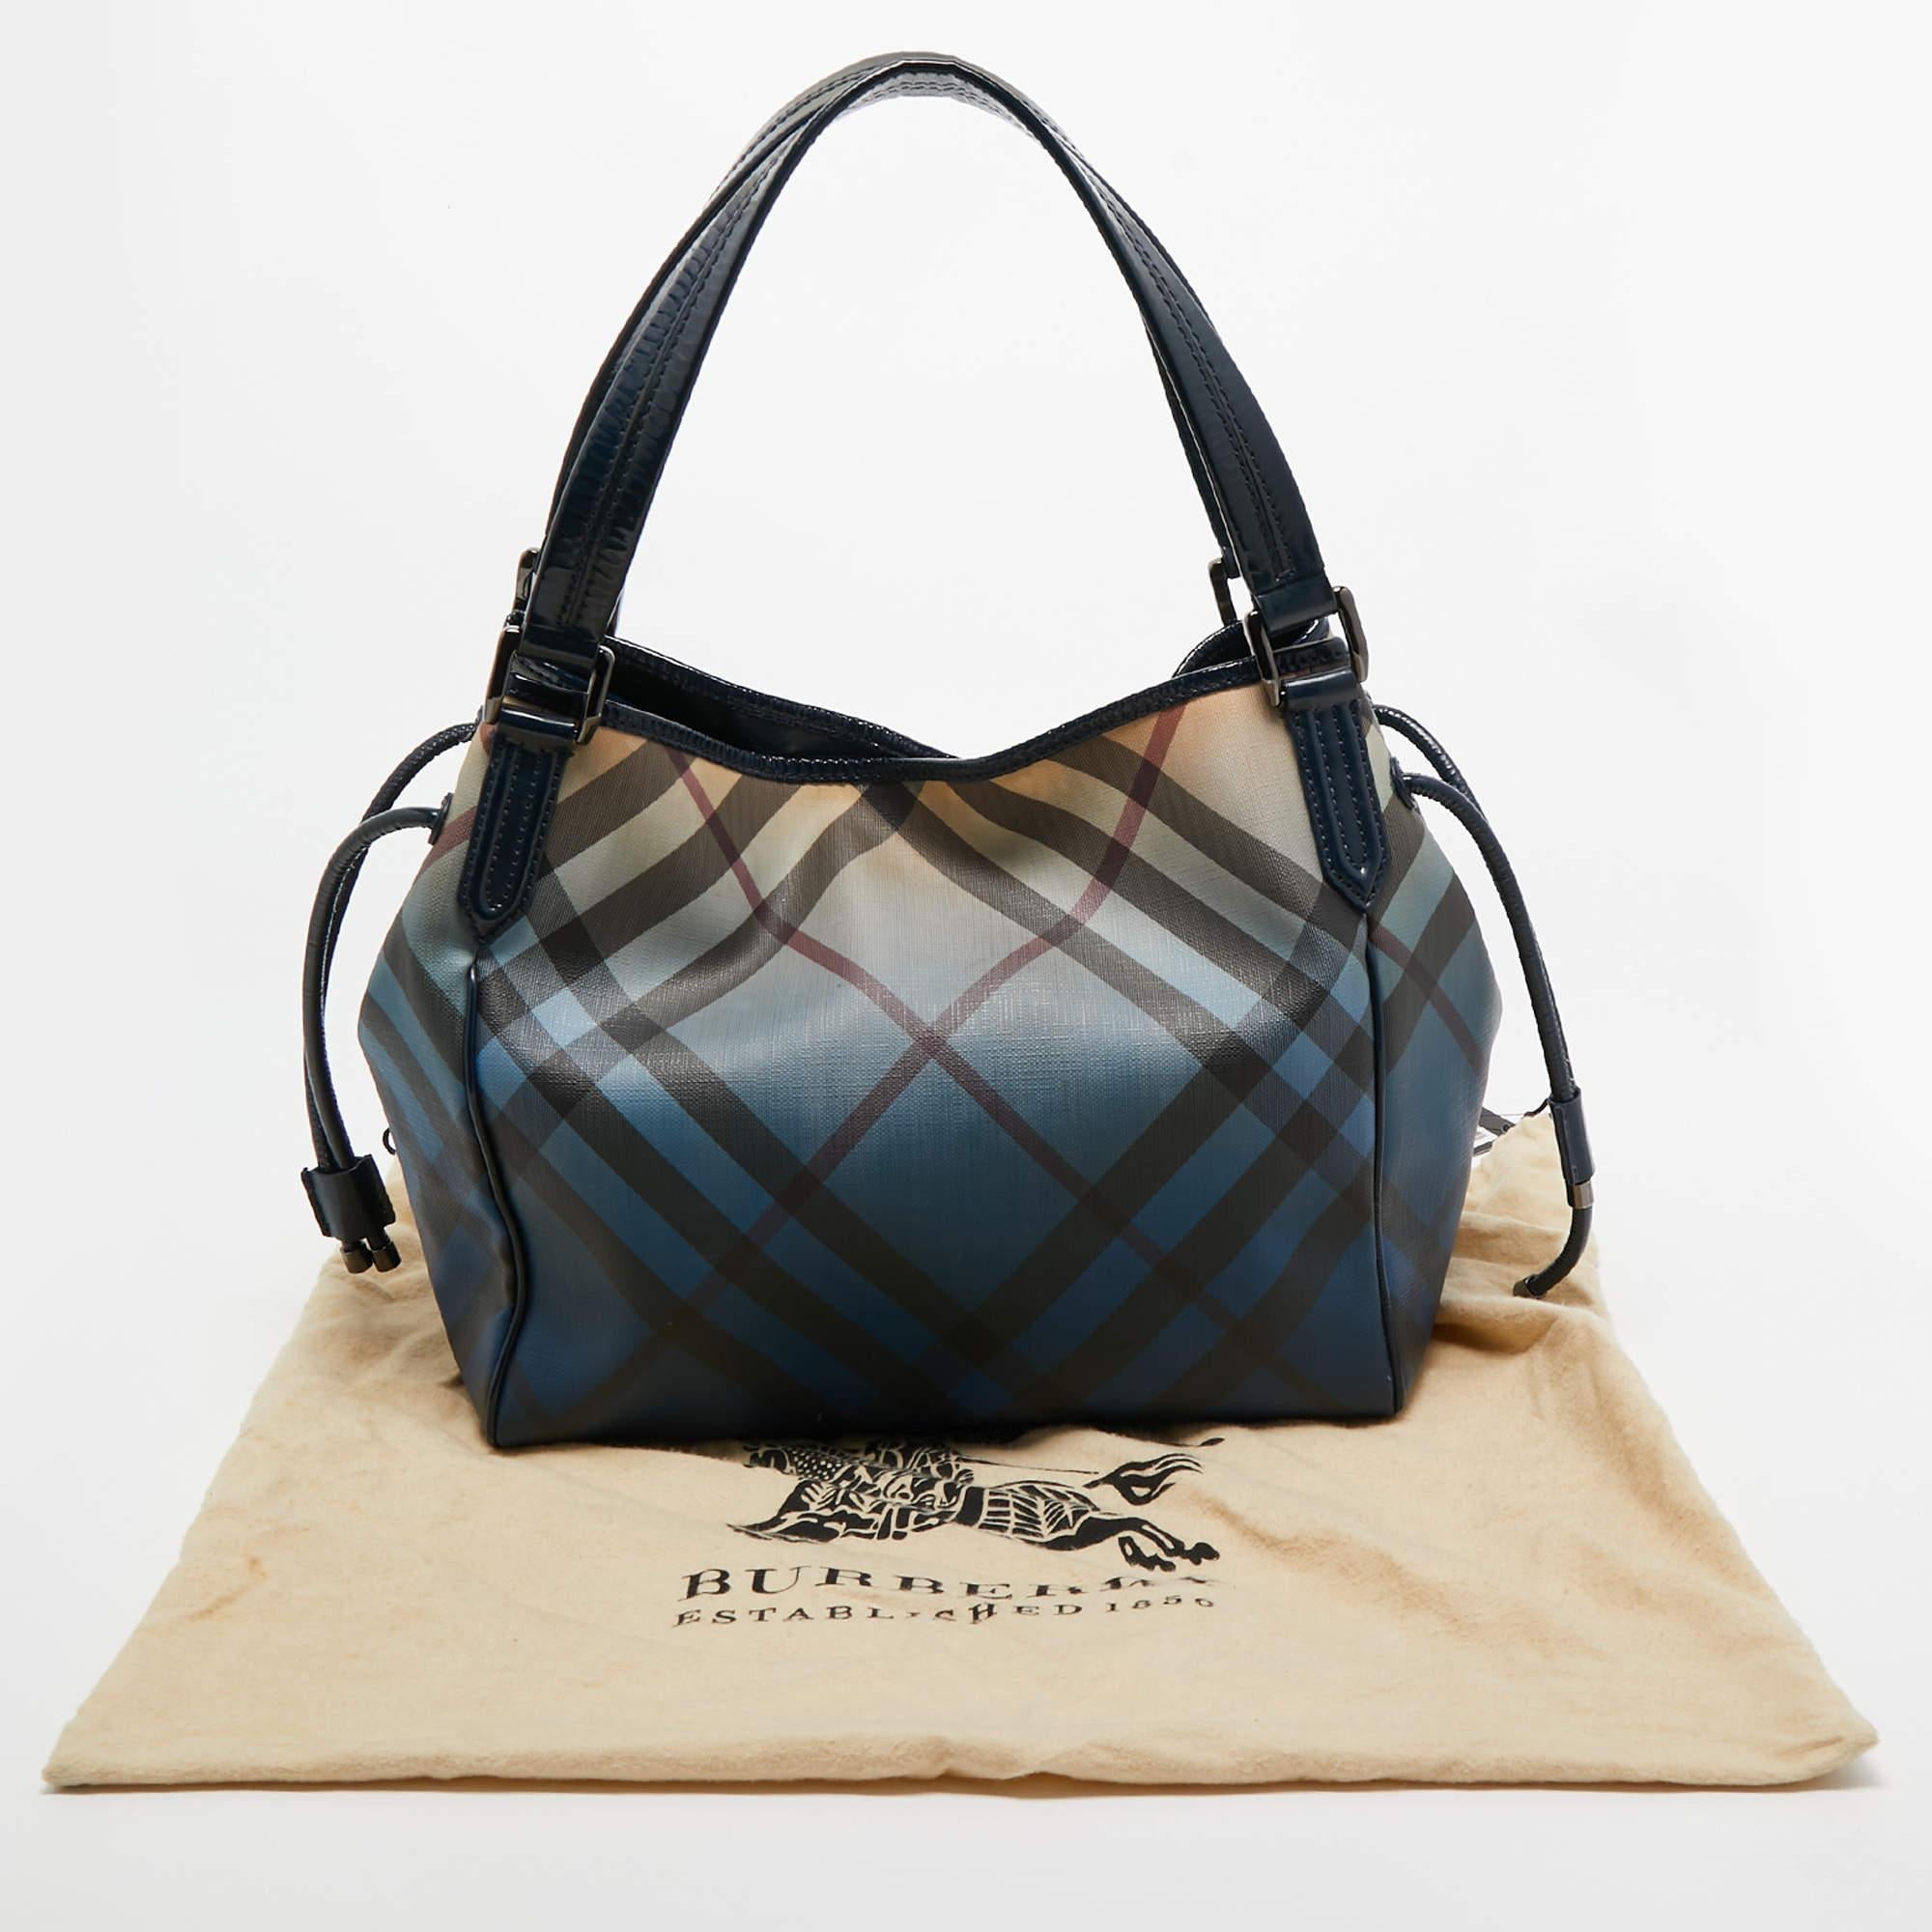 Burberry Navy Blue/Beige Ombre PVC and Patent Leather Biltmore Tote For Sale 9